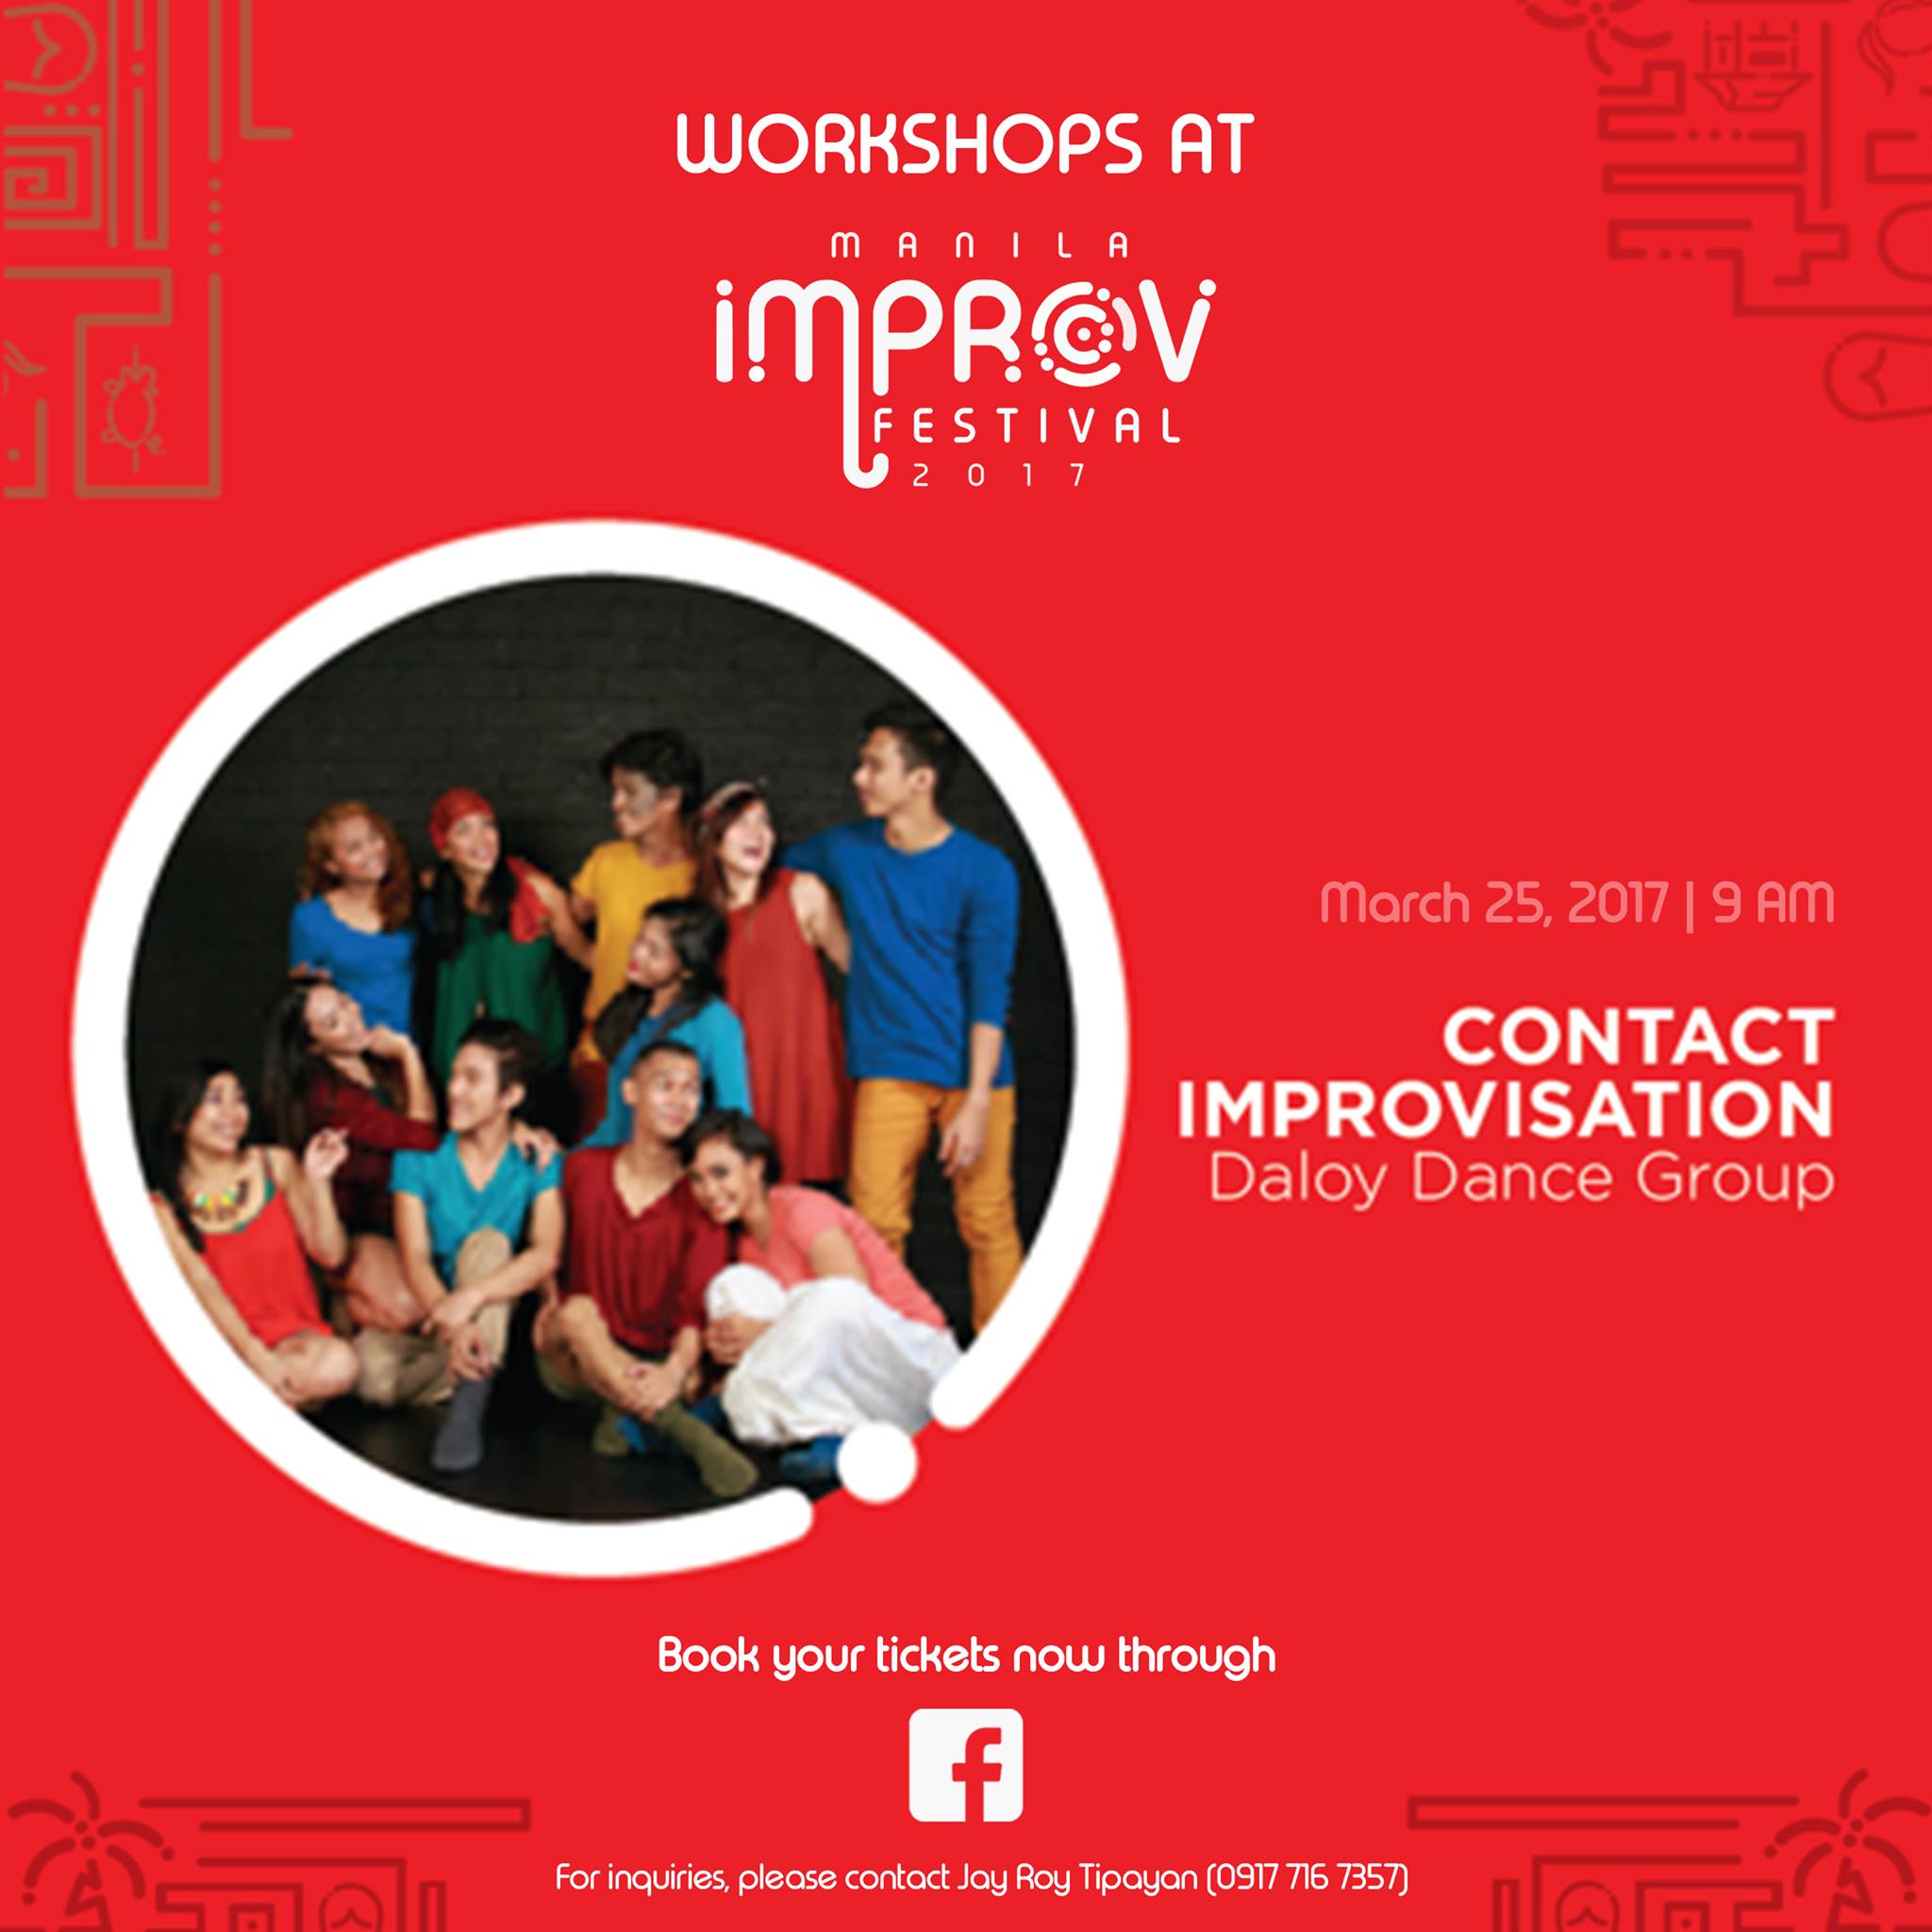 PETA Theater Center Page Liked · March 4 · Words aren't the only thing you can improvise with. Learn to let your body movements express your emotions freely with the Daloy Dance Company - a Manila-based dance theatre collective founded by EA Torrado. They have performed in festivals in Japan,Bangkok and the Philippines. Tune your senses into the ever-shifting dialogue of movement. Contact Improvisation Class | March 25 | 9am Book your tickets by sending us a private message or calling (0917) 716 7357. #ManilaImprovFest